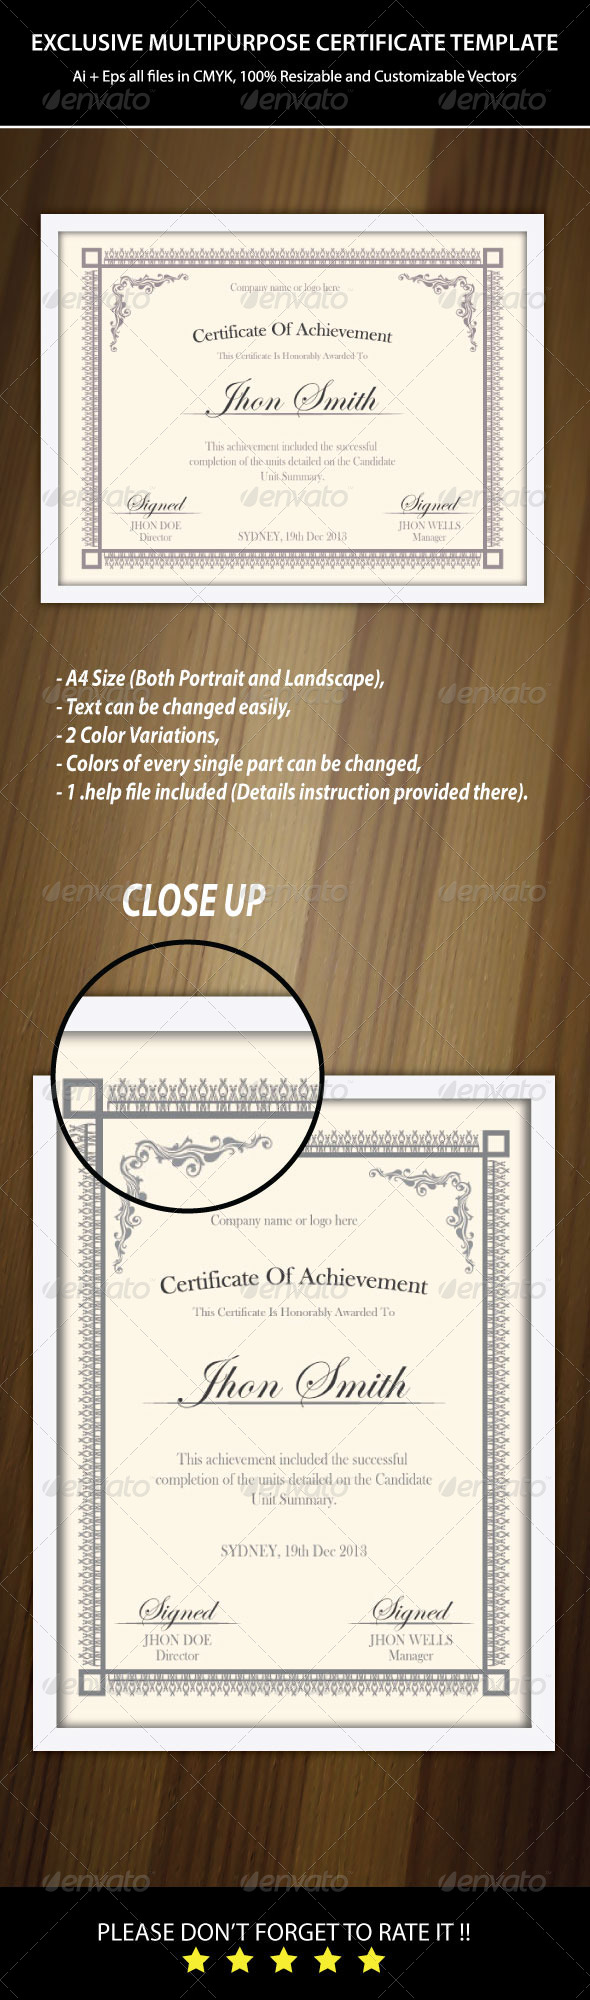 Multipurpose Certificate Templates Intended For Landscape Certificate Templates